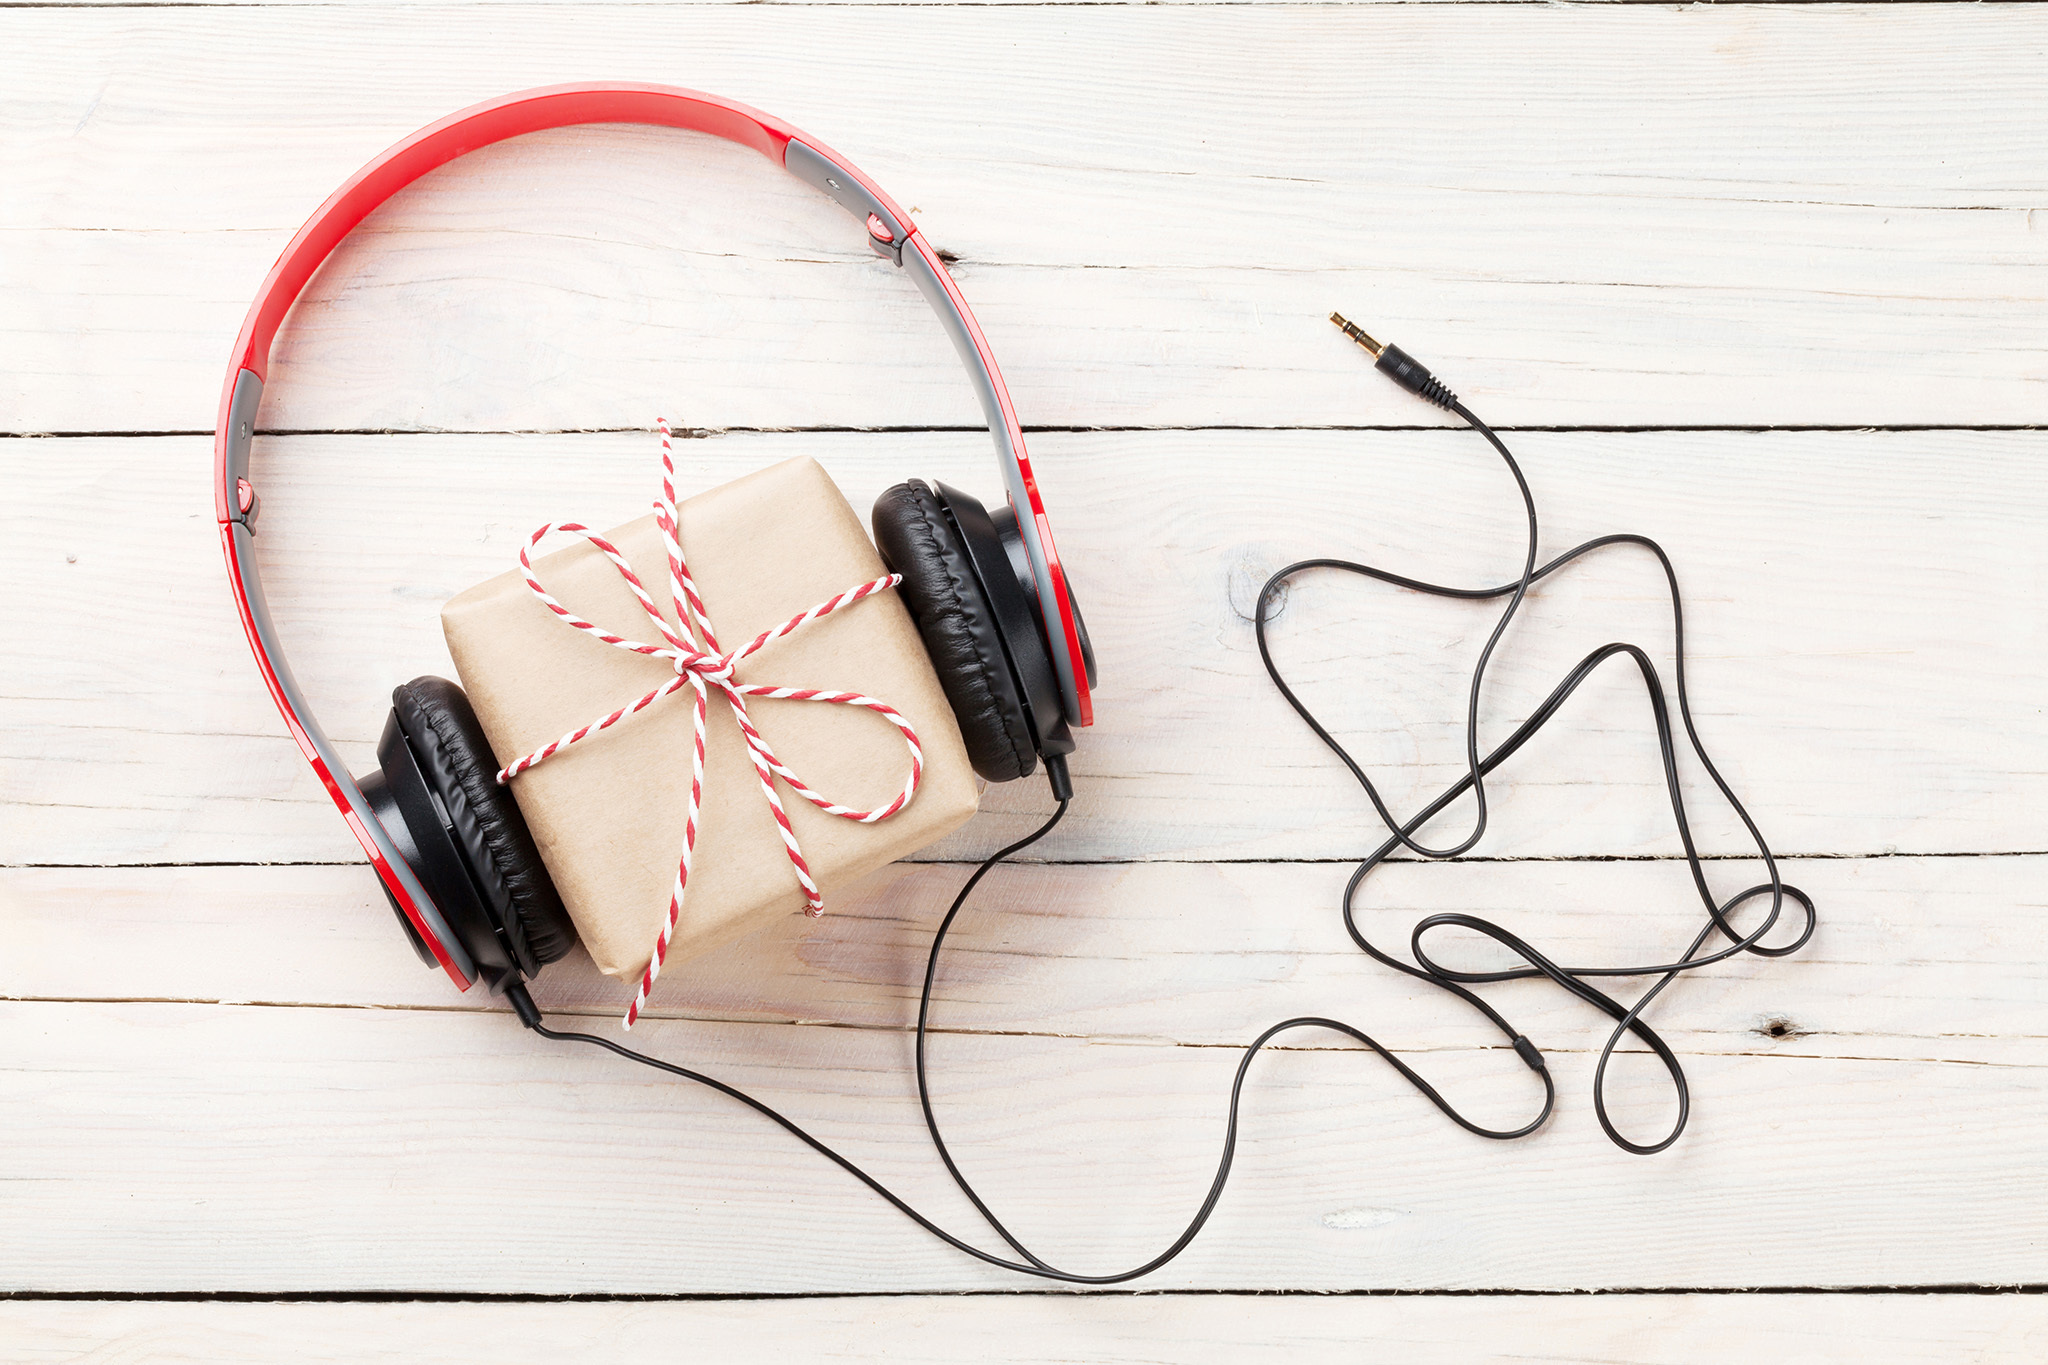 15 Best Christmas Gifts for Music Lovers